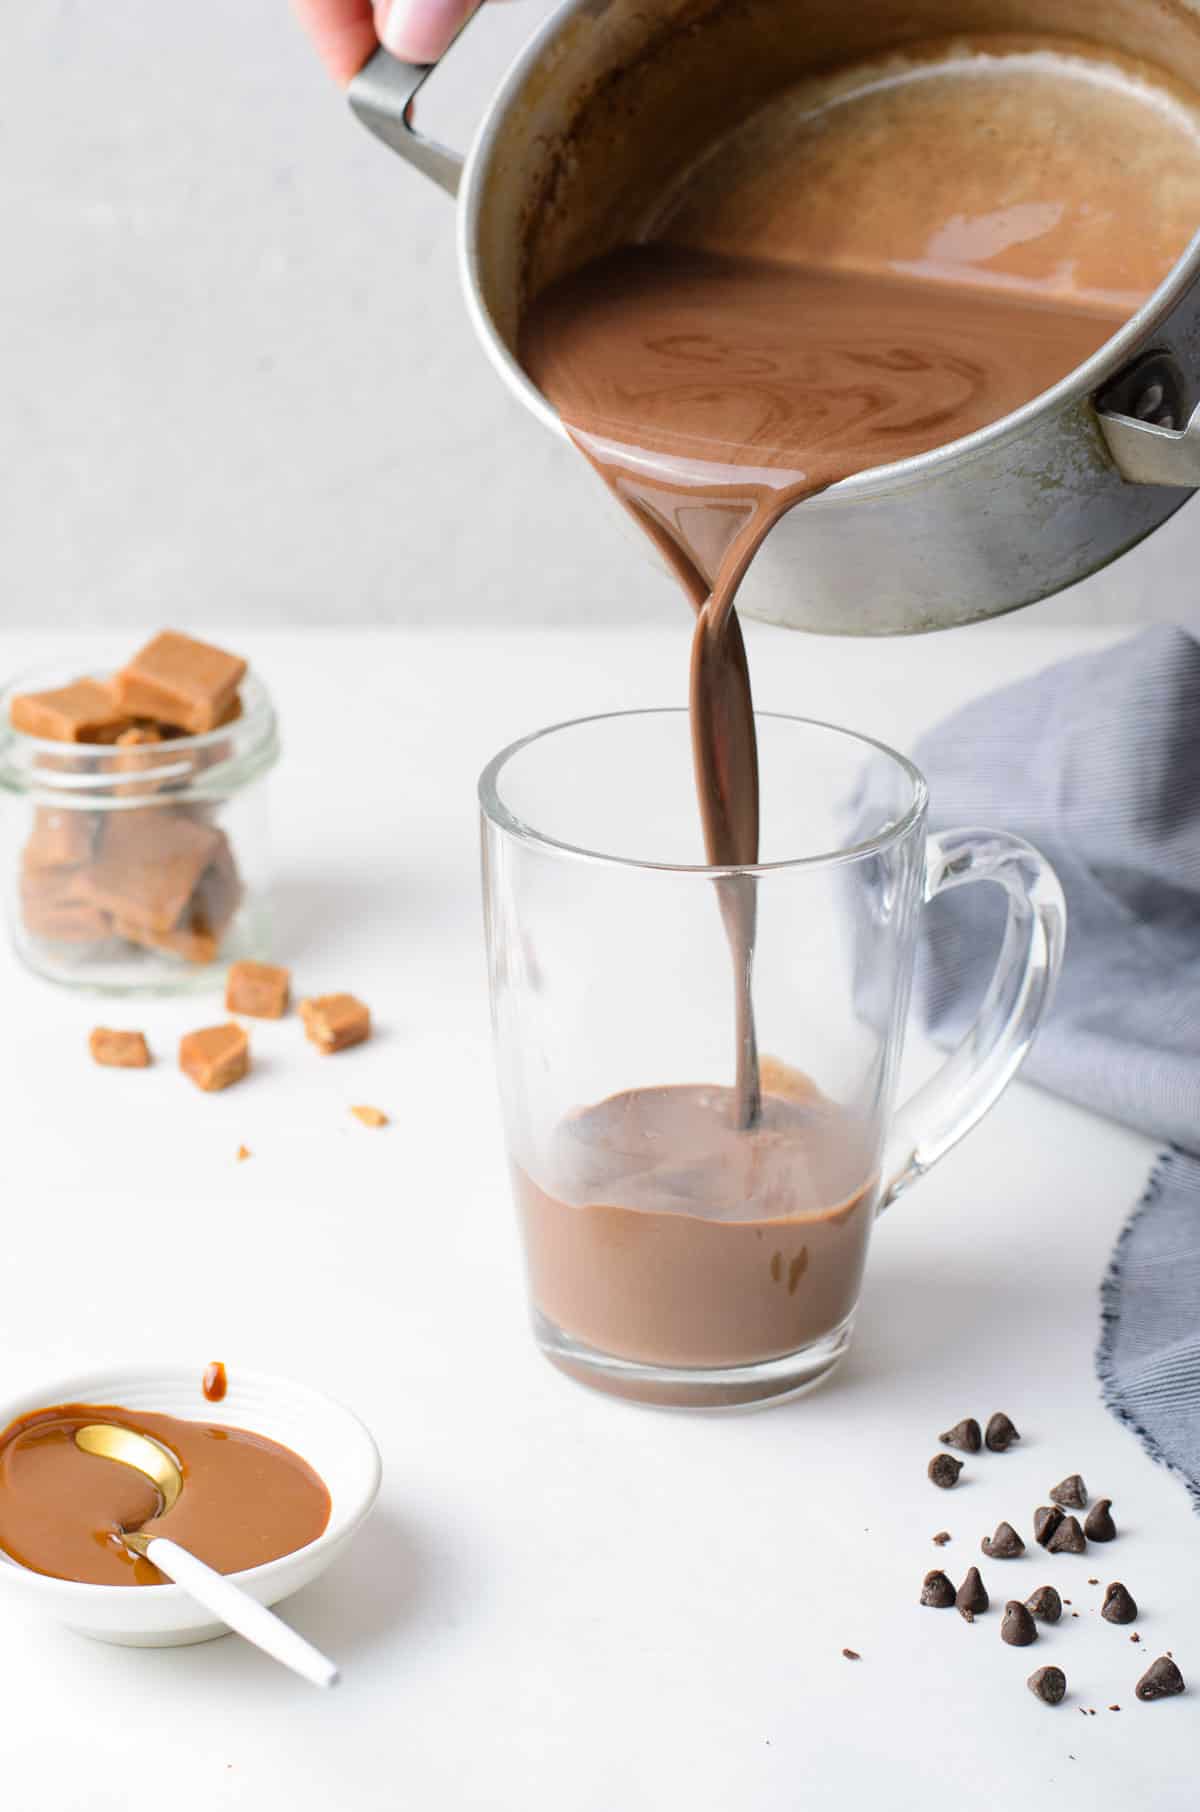 Hot chocolate being poured from a saucepan into a clear glass mug.